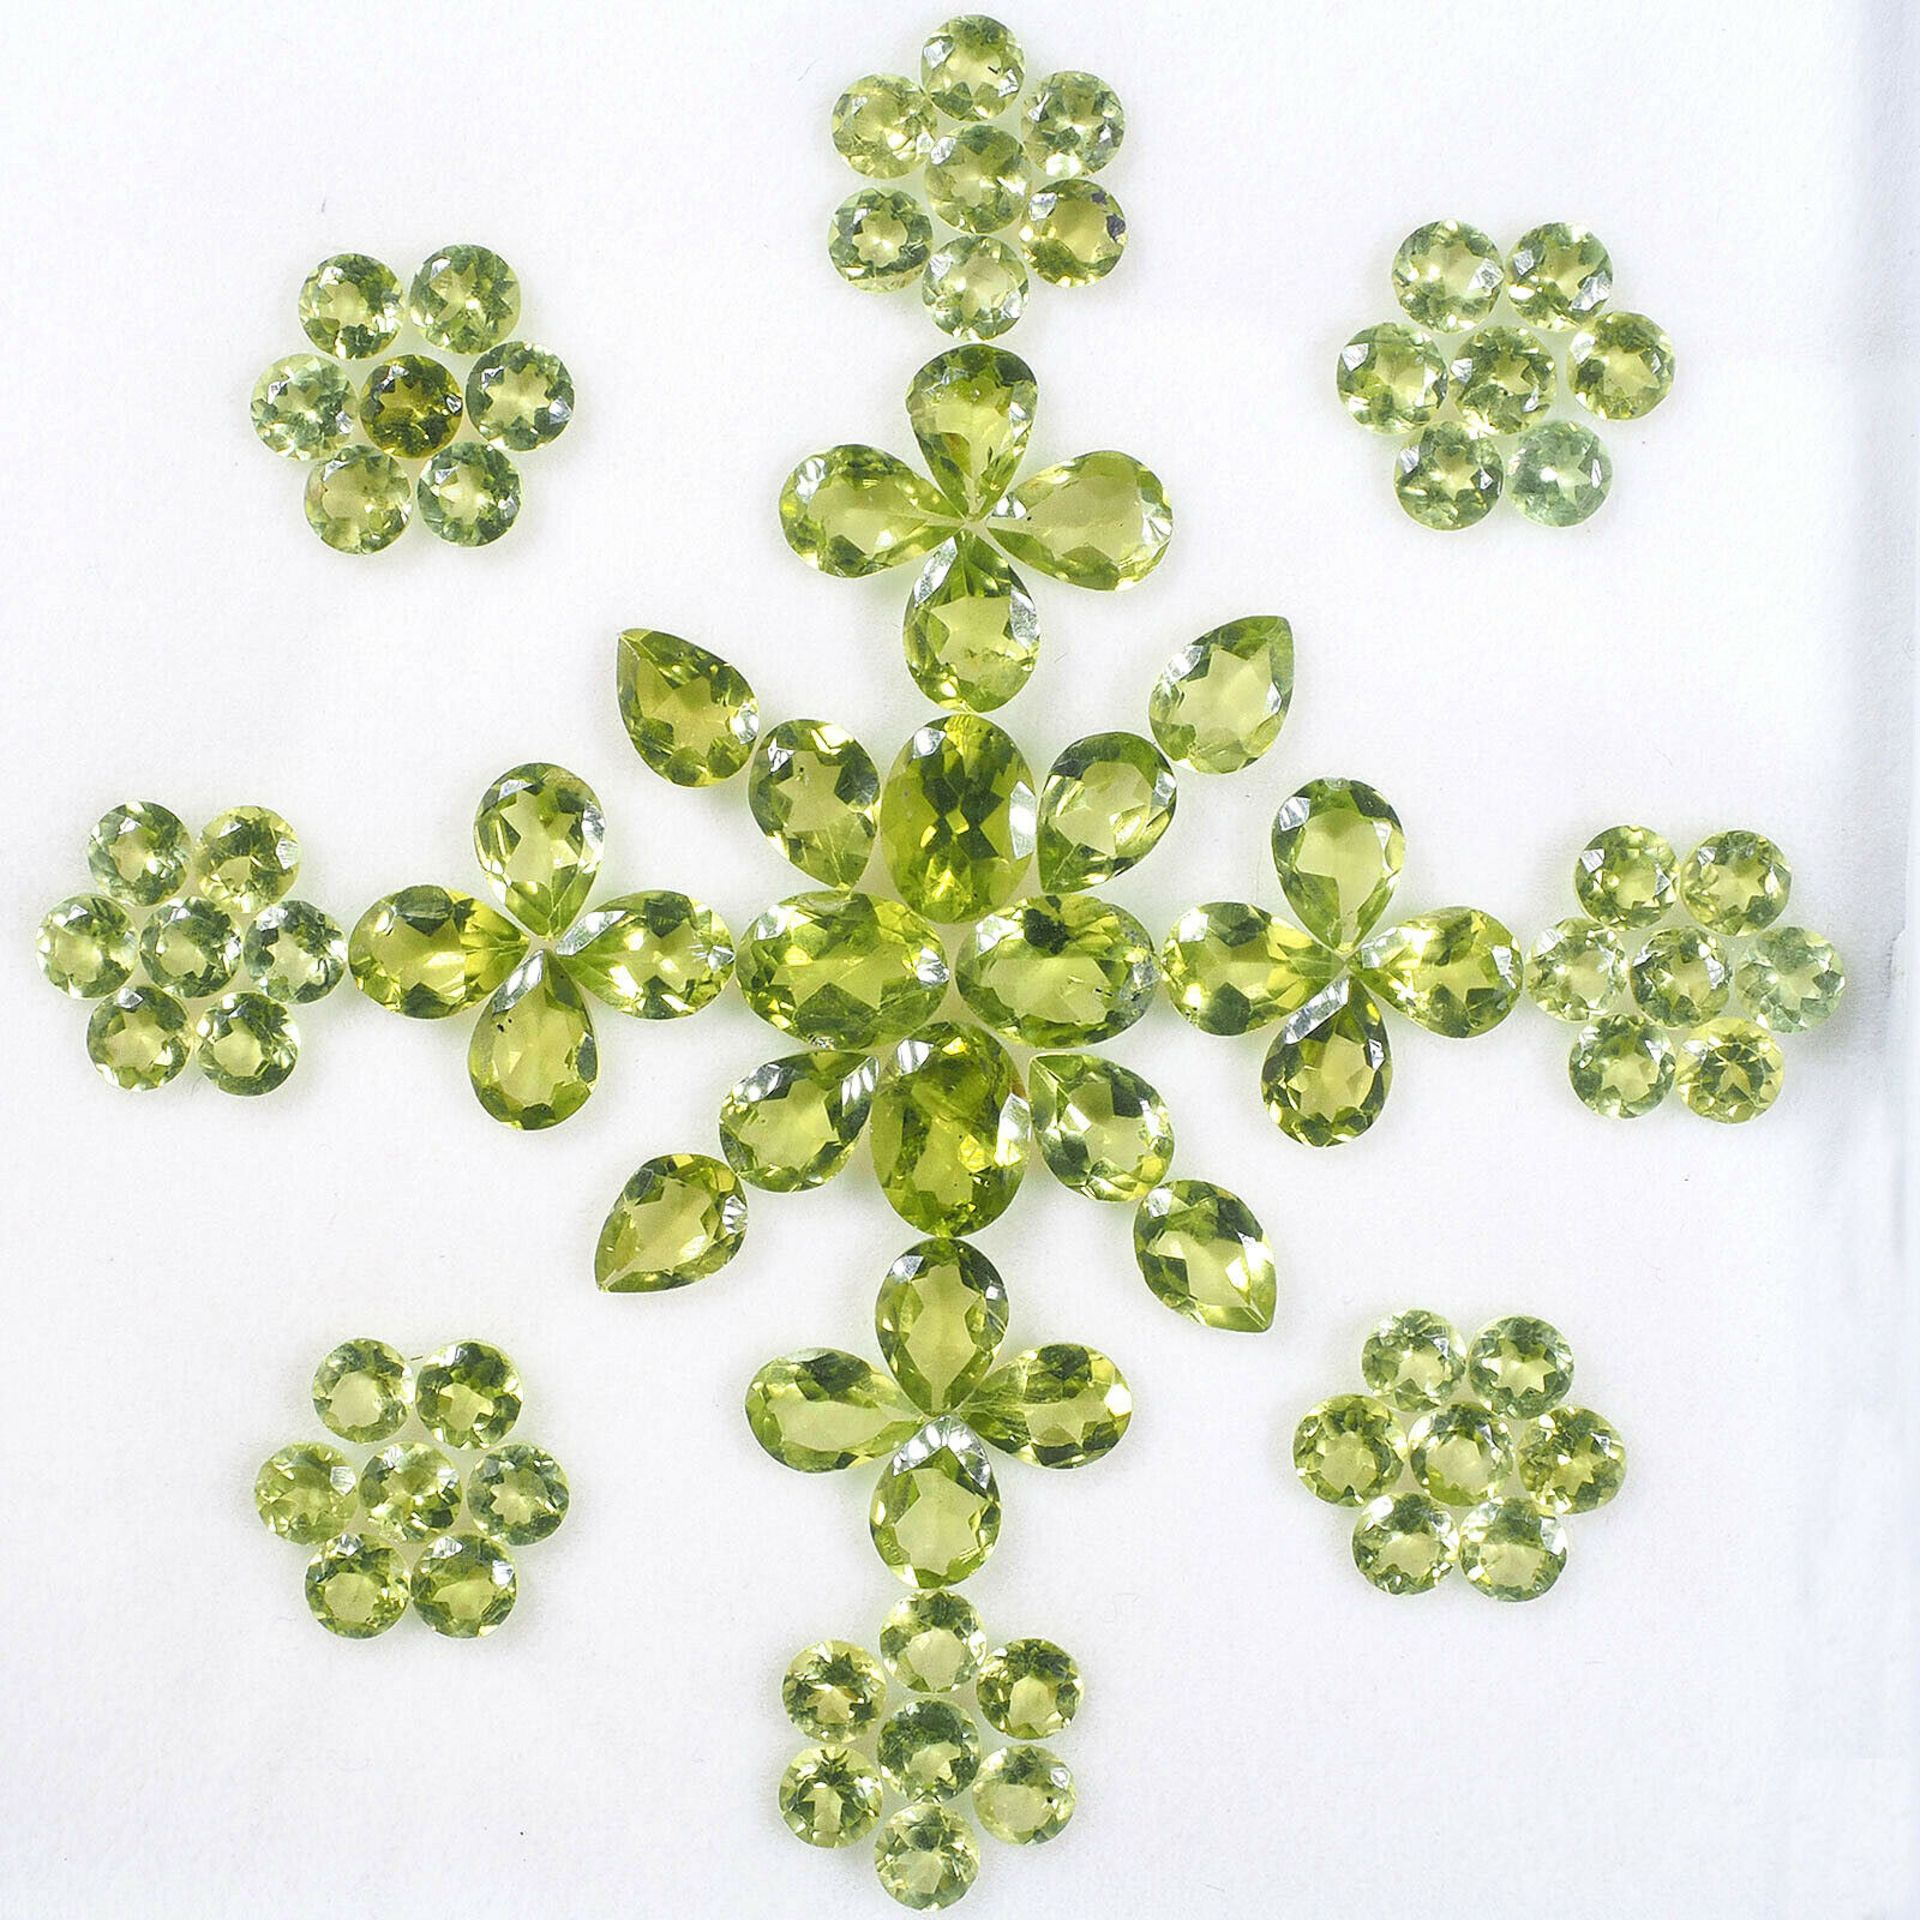 IGL&I Certified, A Company part of the GIA organisation, Natural Peridot 37.65 carat 84 pieces -